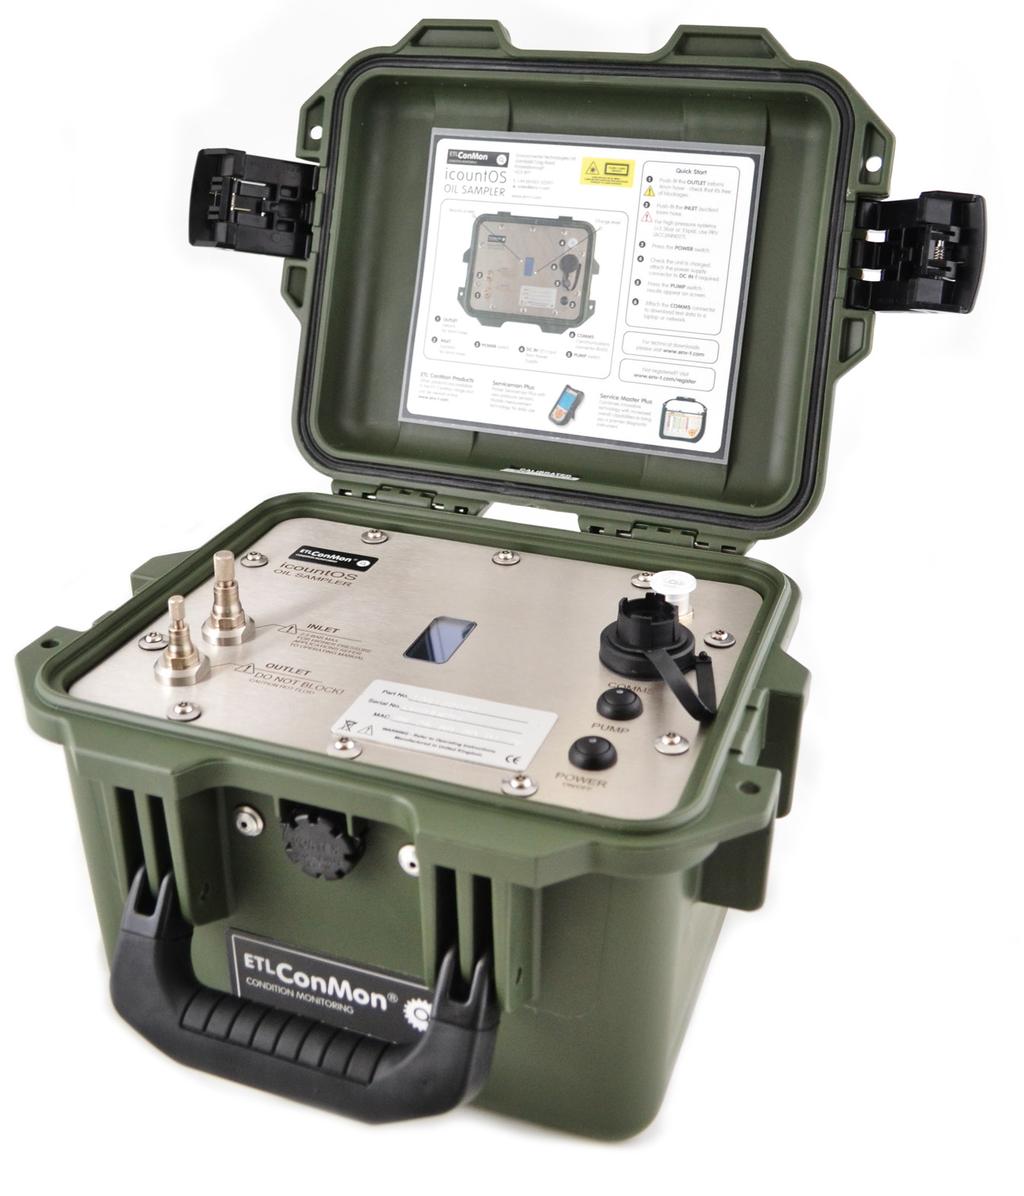 ETLConMon CONDITION MONITORING Product Datasheet icount Oil Sampler (IOS) Portable Condition Monitoring The icountos (IOS) is an innovative solution to the challenge of measuring the quality of